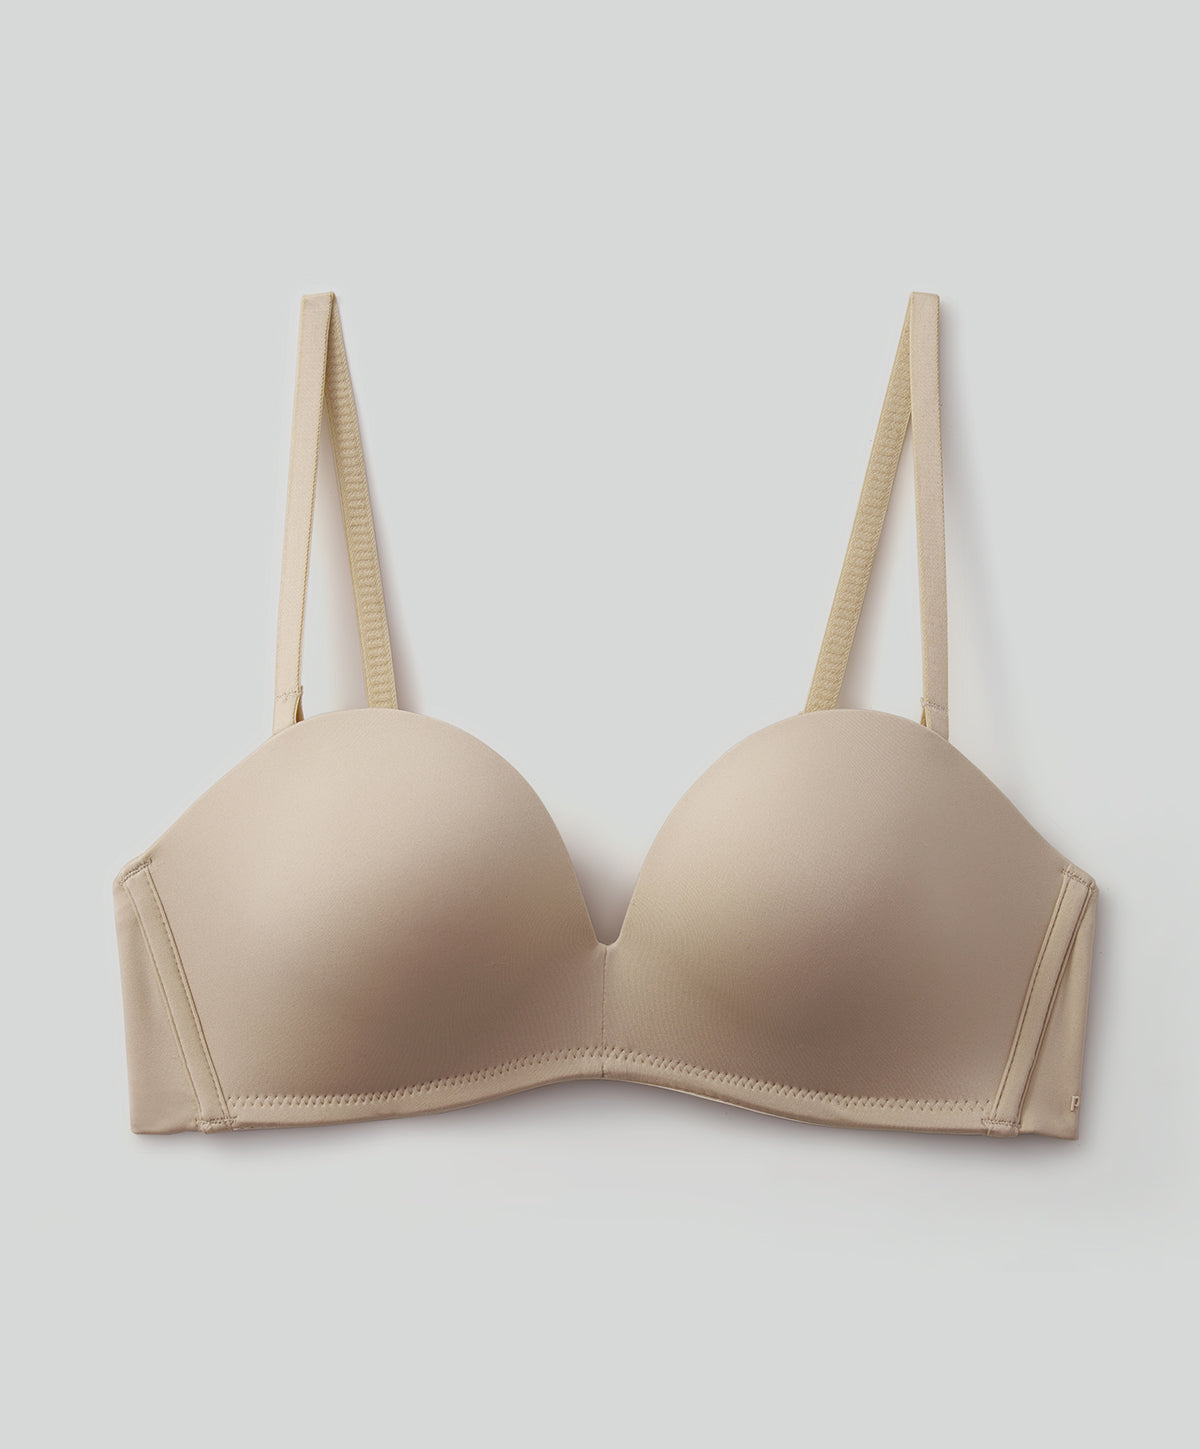 Strapless & Convertible Bras Archives - Silk Elegance Lingerie and